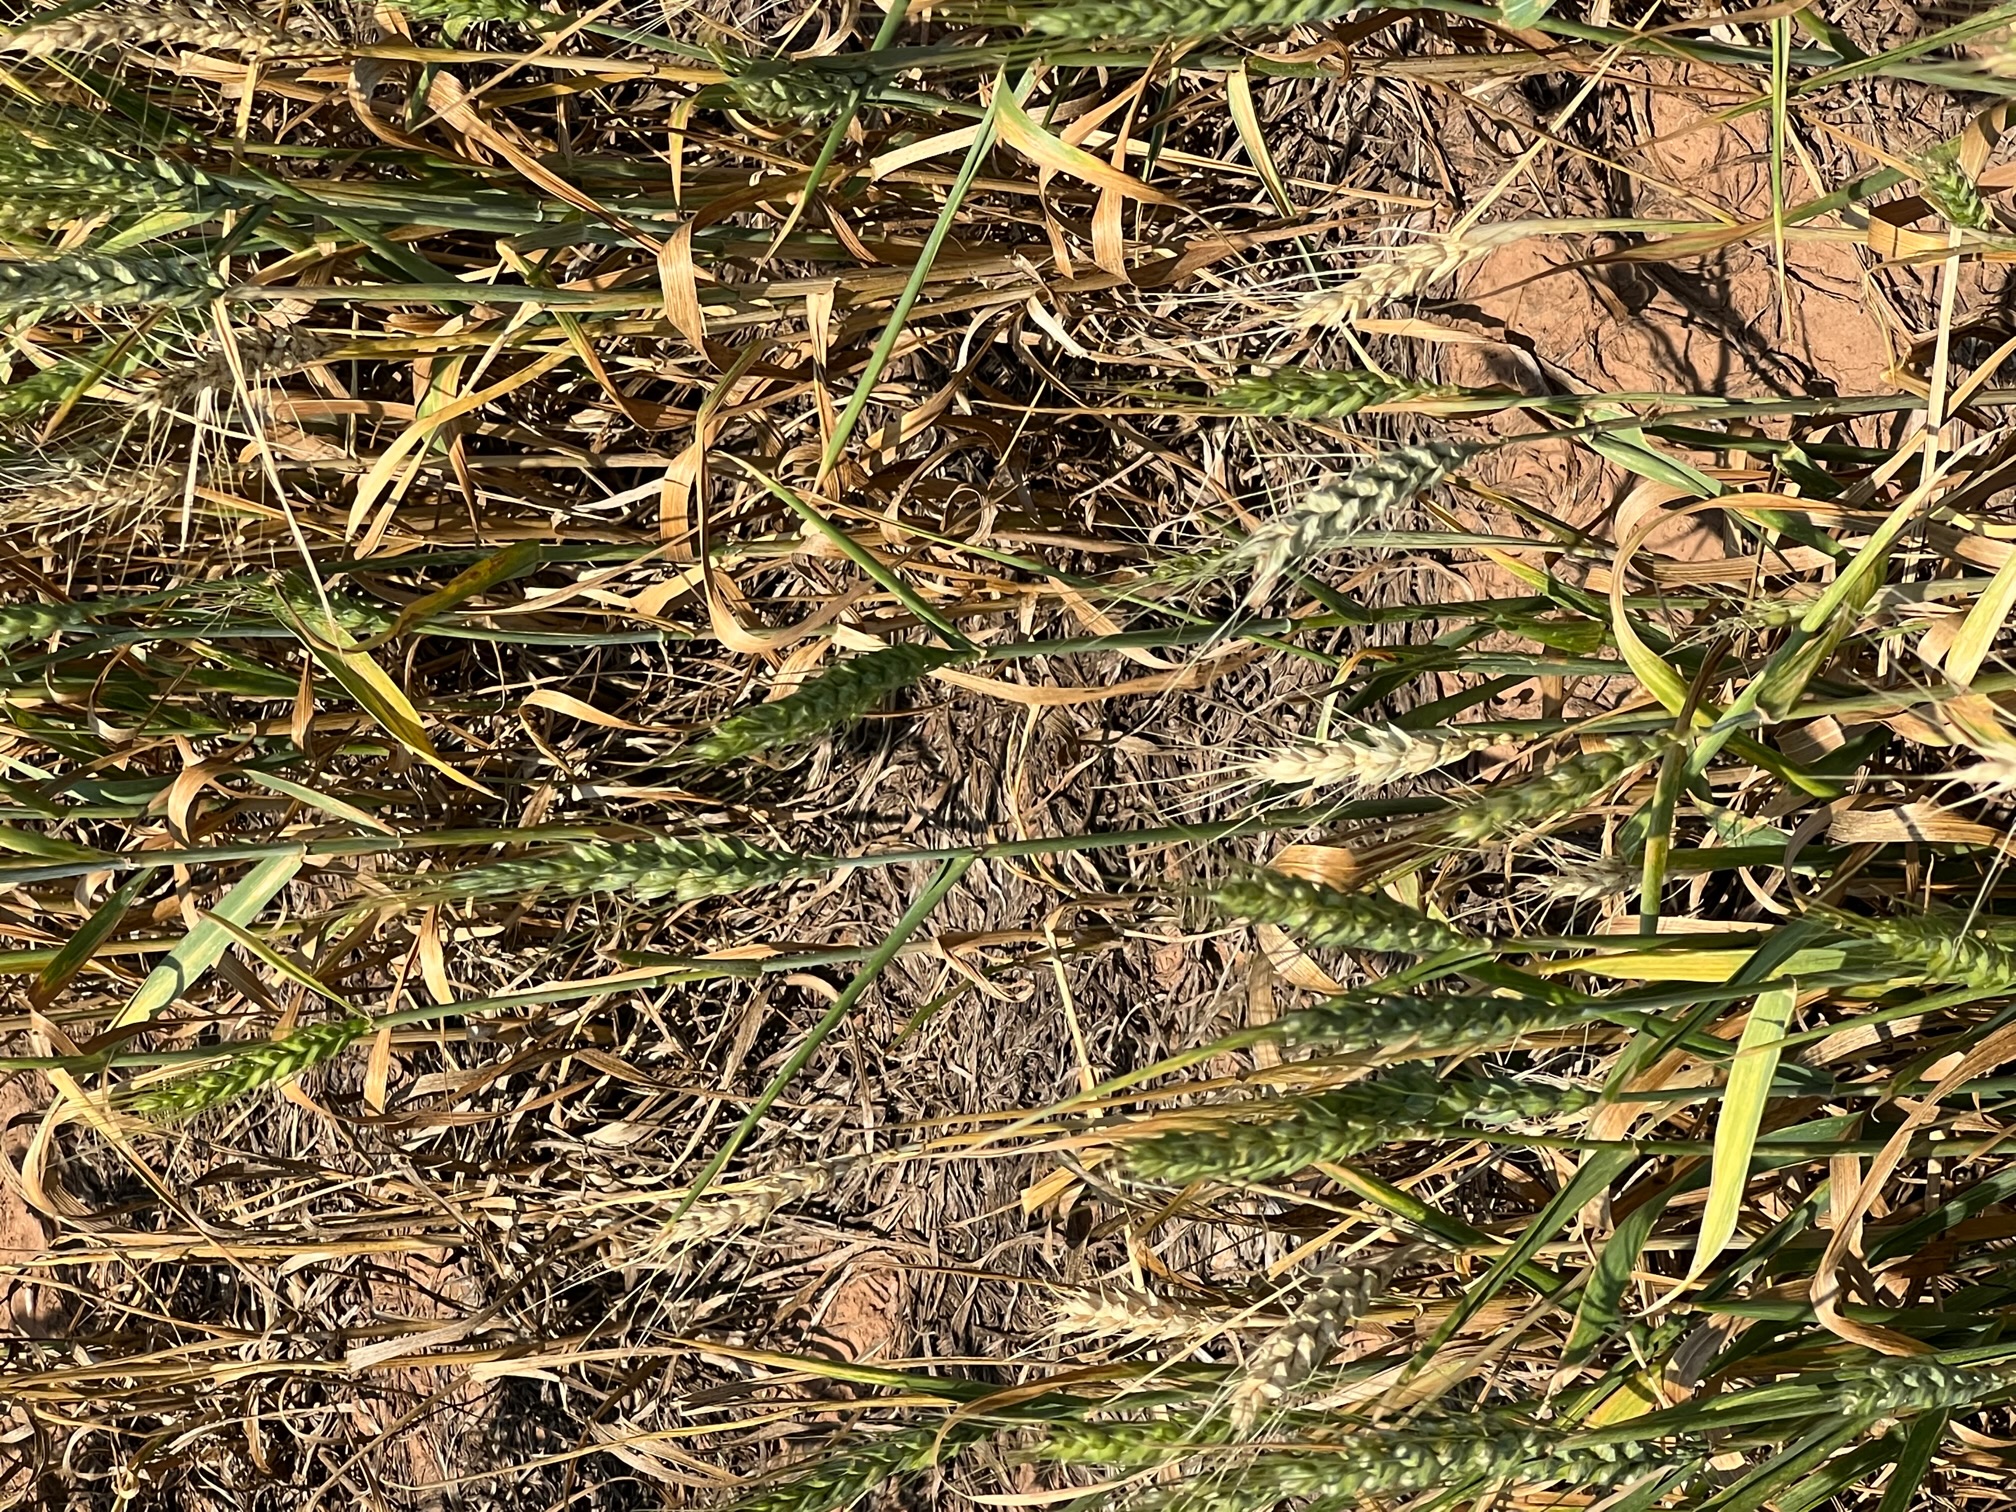 Crop Scouts on Day Two of Kansas Wheat Tour Find 2022 Crop in Trouble Due to Drought